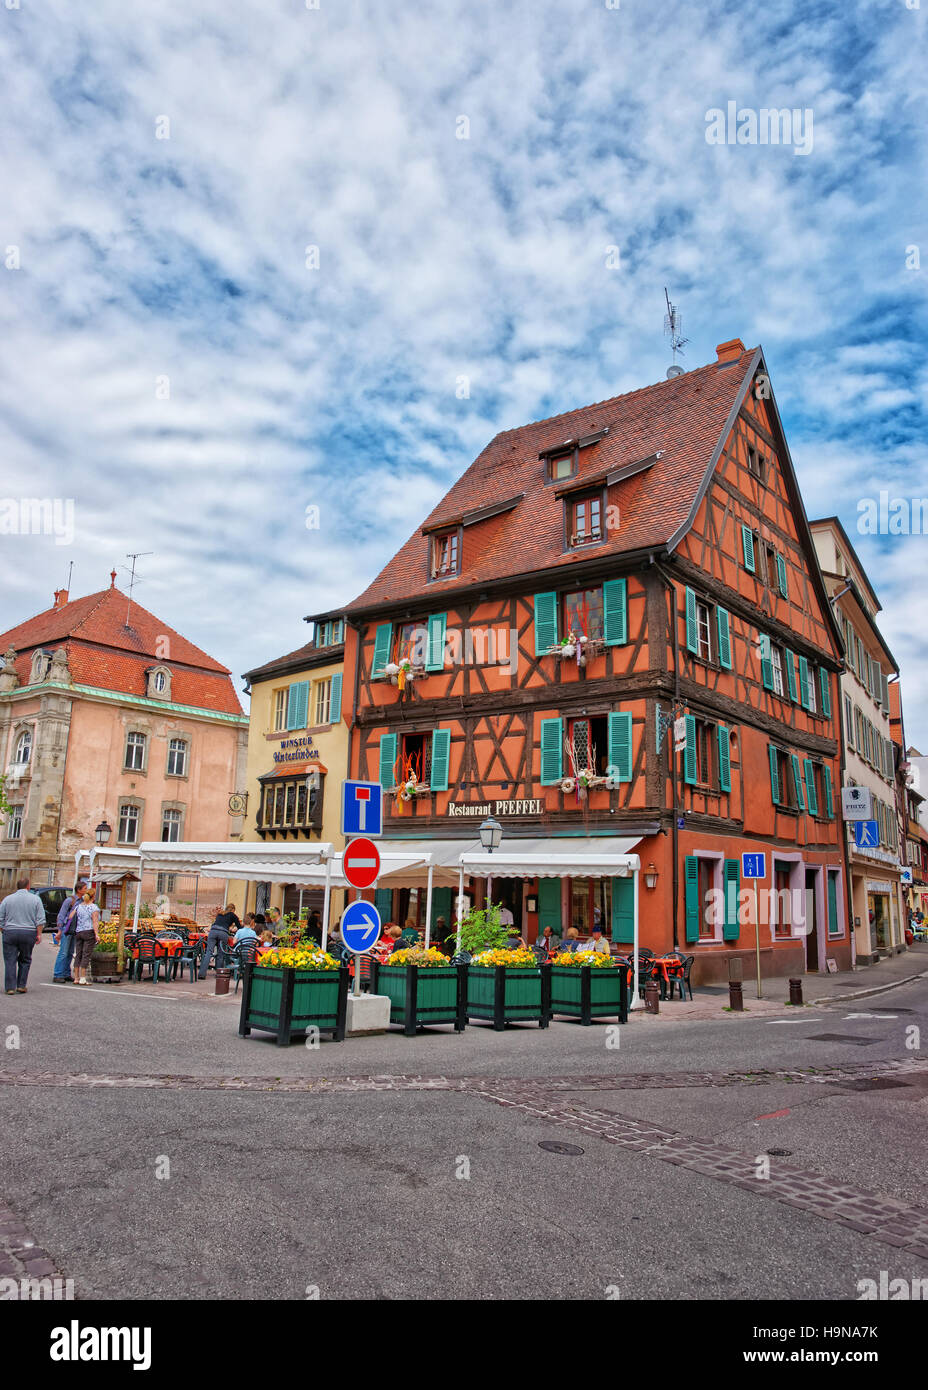 Colmar, France - May 1, 2012: Pfeffel restaurant in half timbered style on Unterlinden Street in the Old city center of Colmar, Haut Rhin in Alsace, F Stock Photo